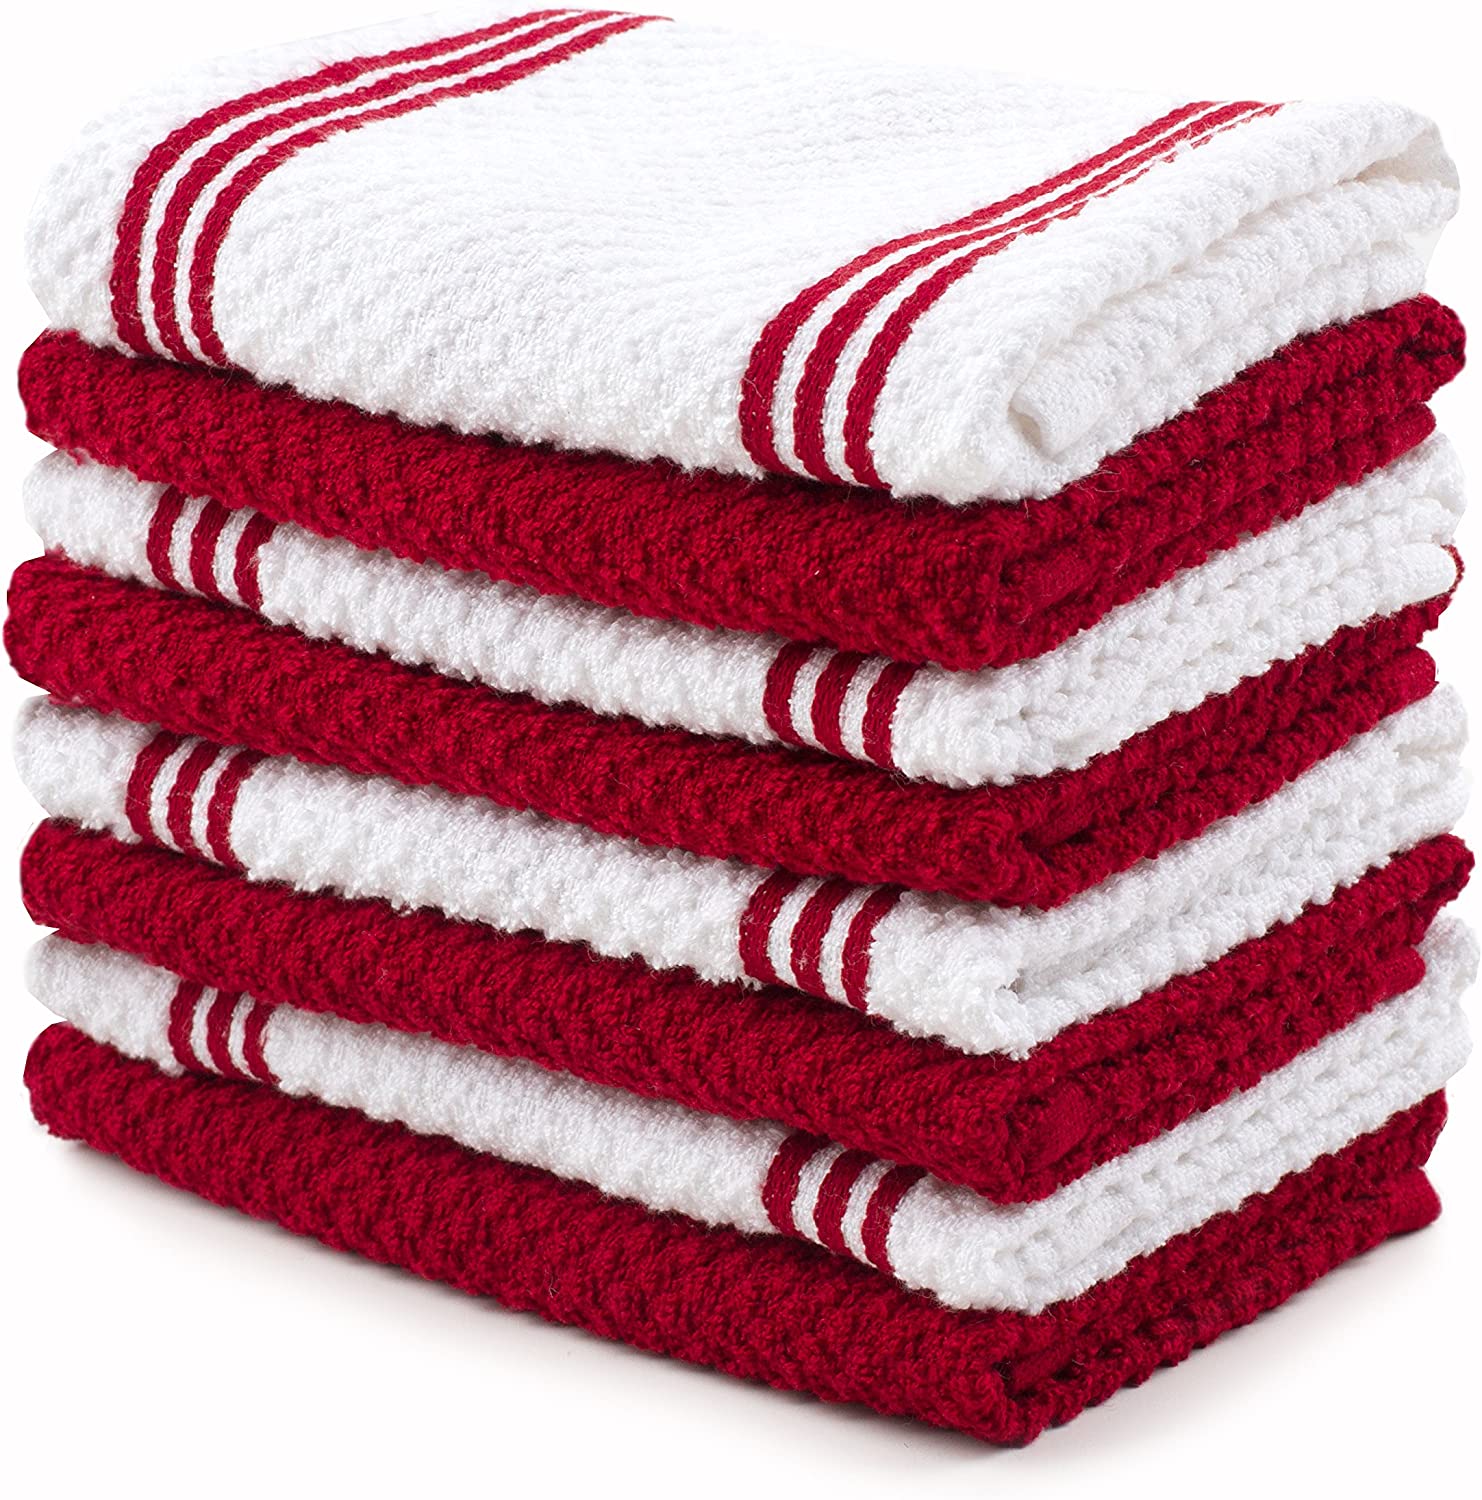 https://www.dontwasteyourmoney.com/wp-content/uploads/2023/01/sticky-toffee-ultra-soft-long-lasting-kitchen-towels-8-pack-kitchen-towel.jpg